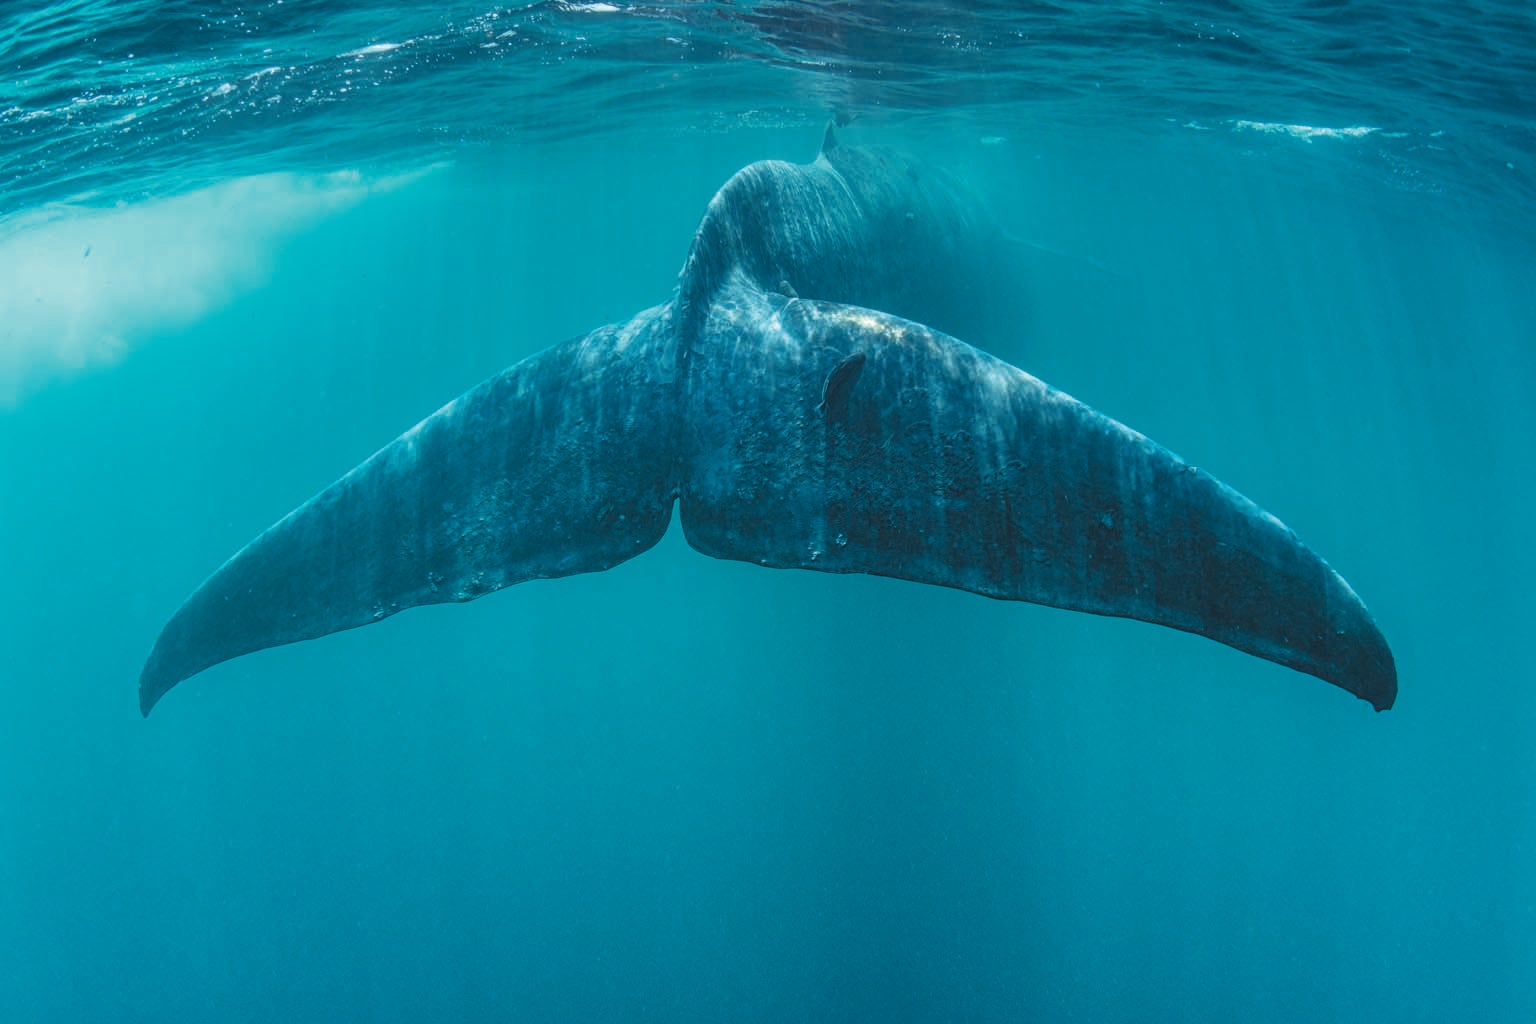 Underwater view of whale swimming away, where the tail takes up most of the frame.